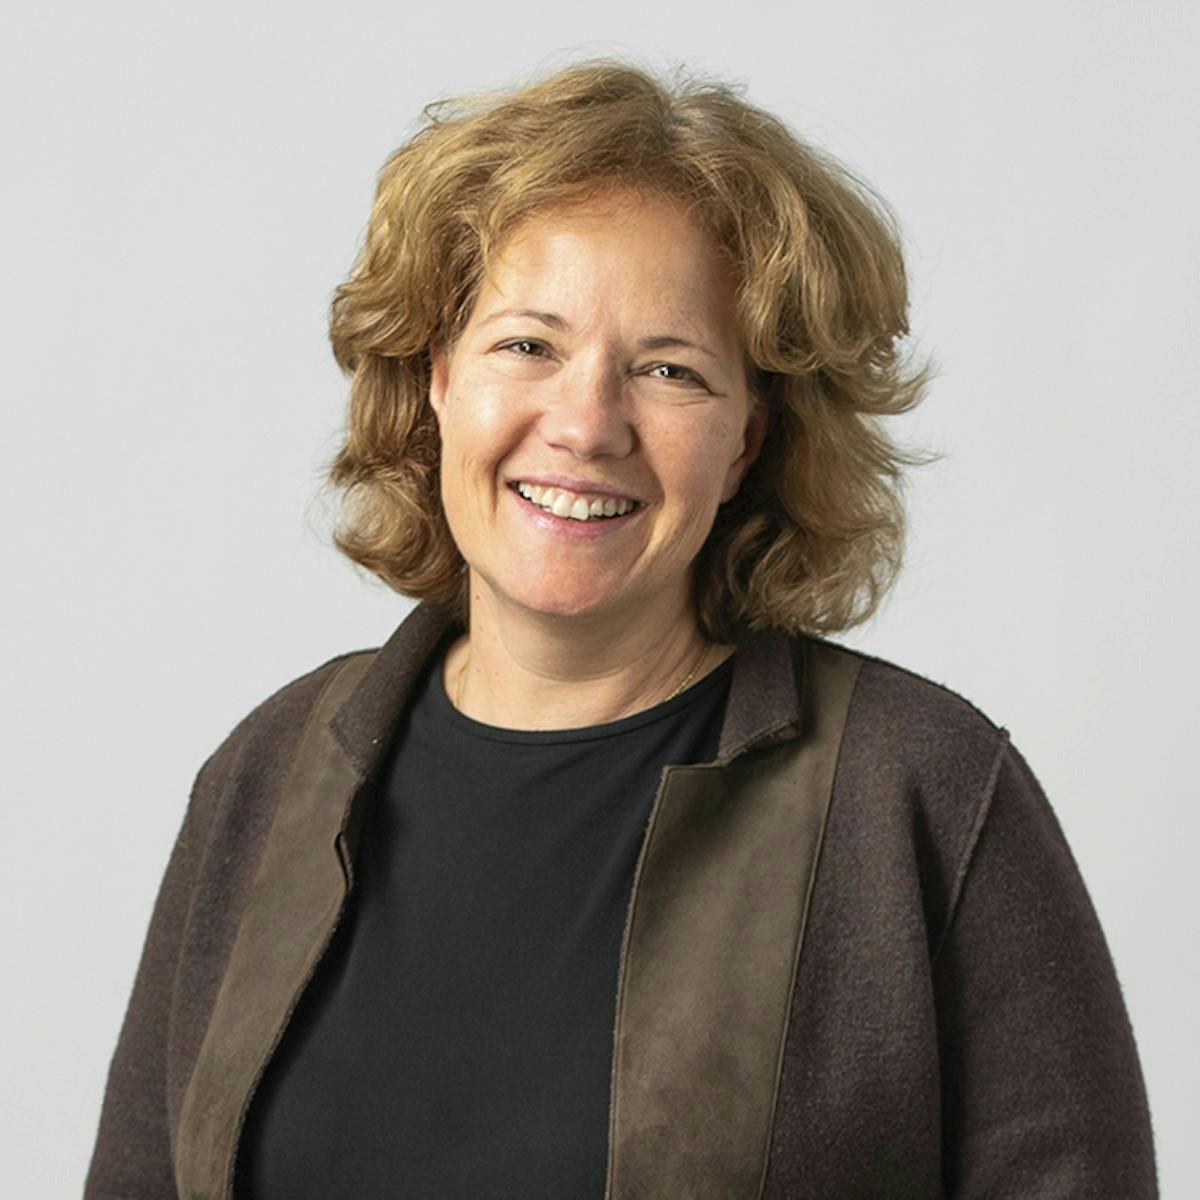 Portrait of Cathy Bell, AIA, LEED AP